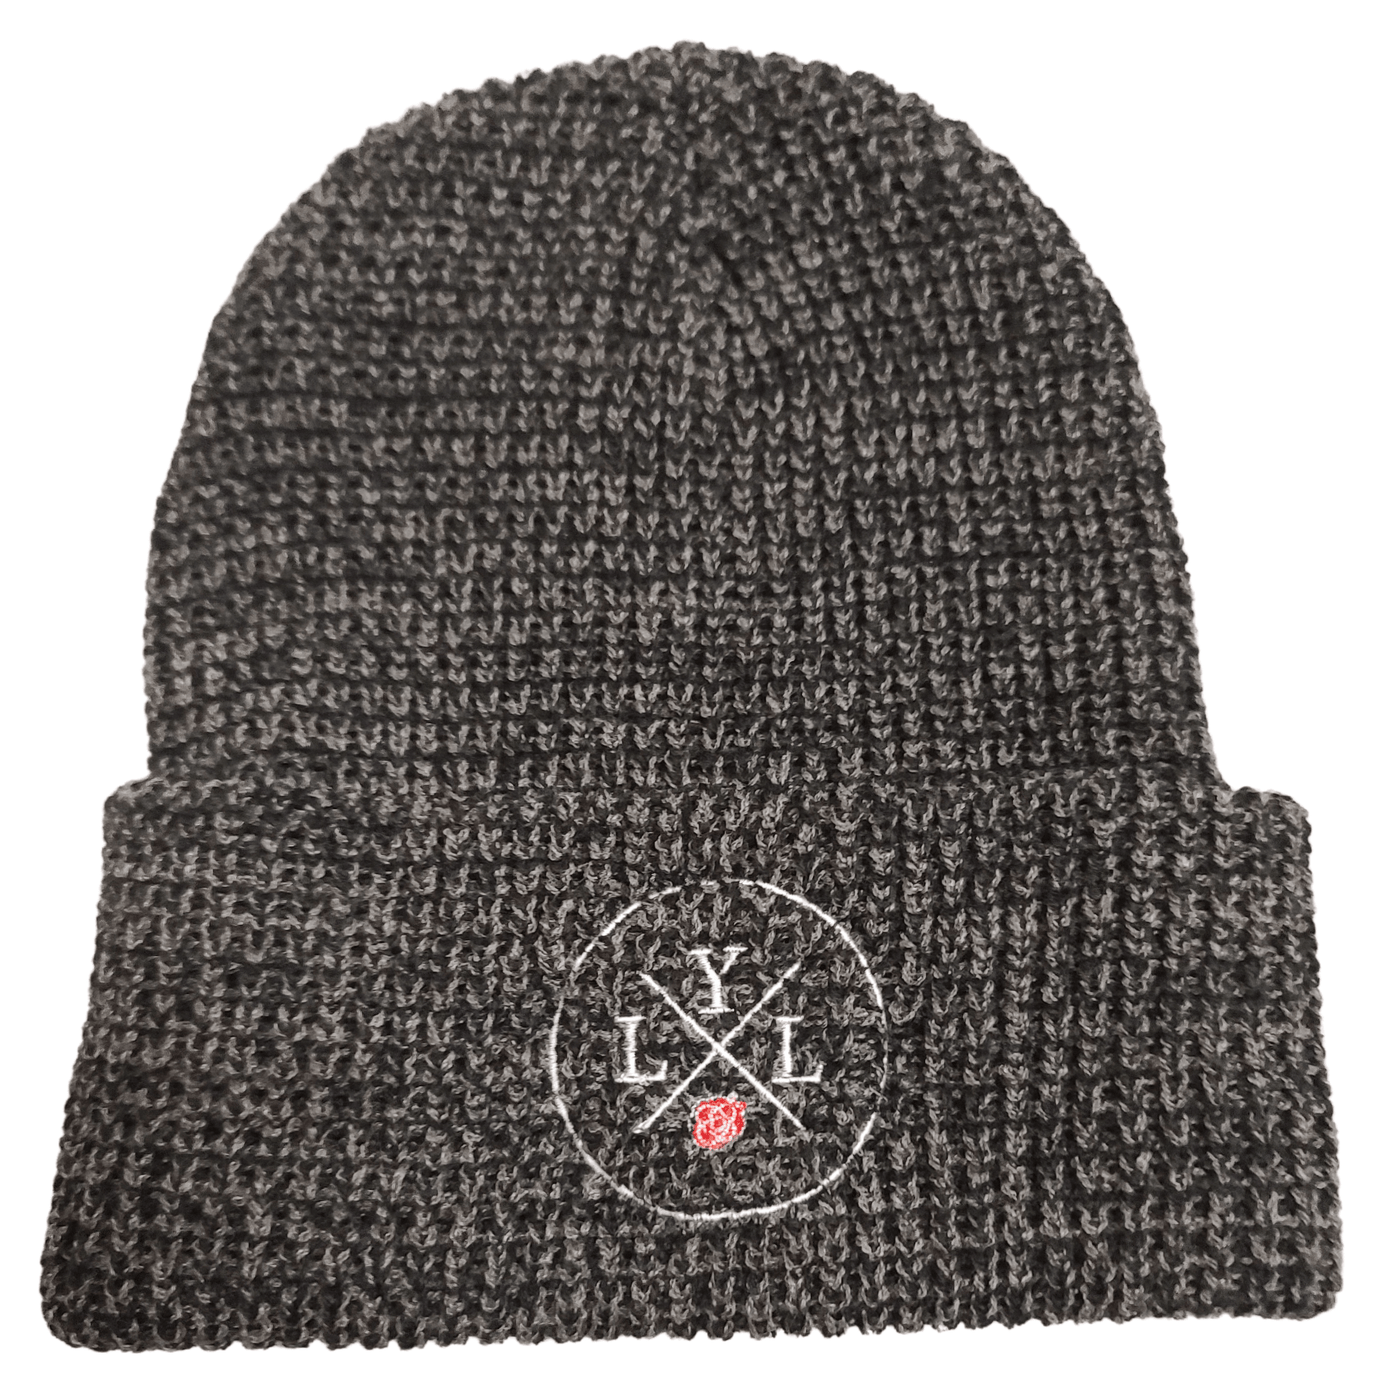 Men's Toques | Leave Your Legacy Clothing